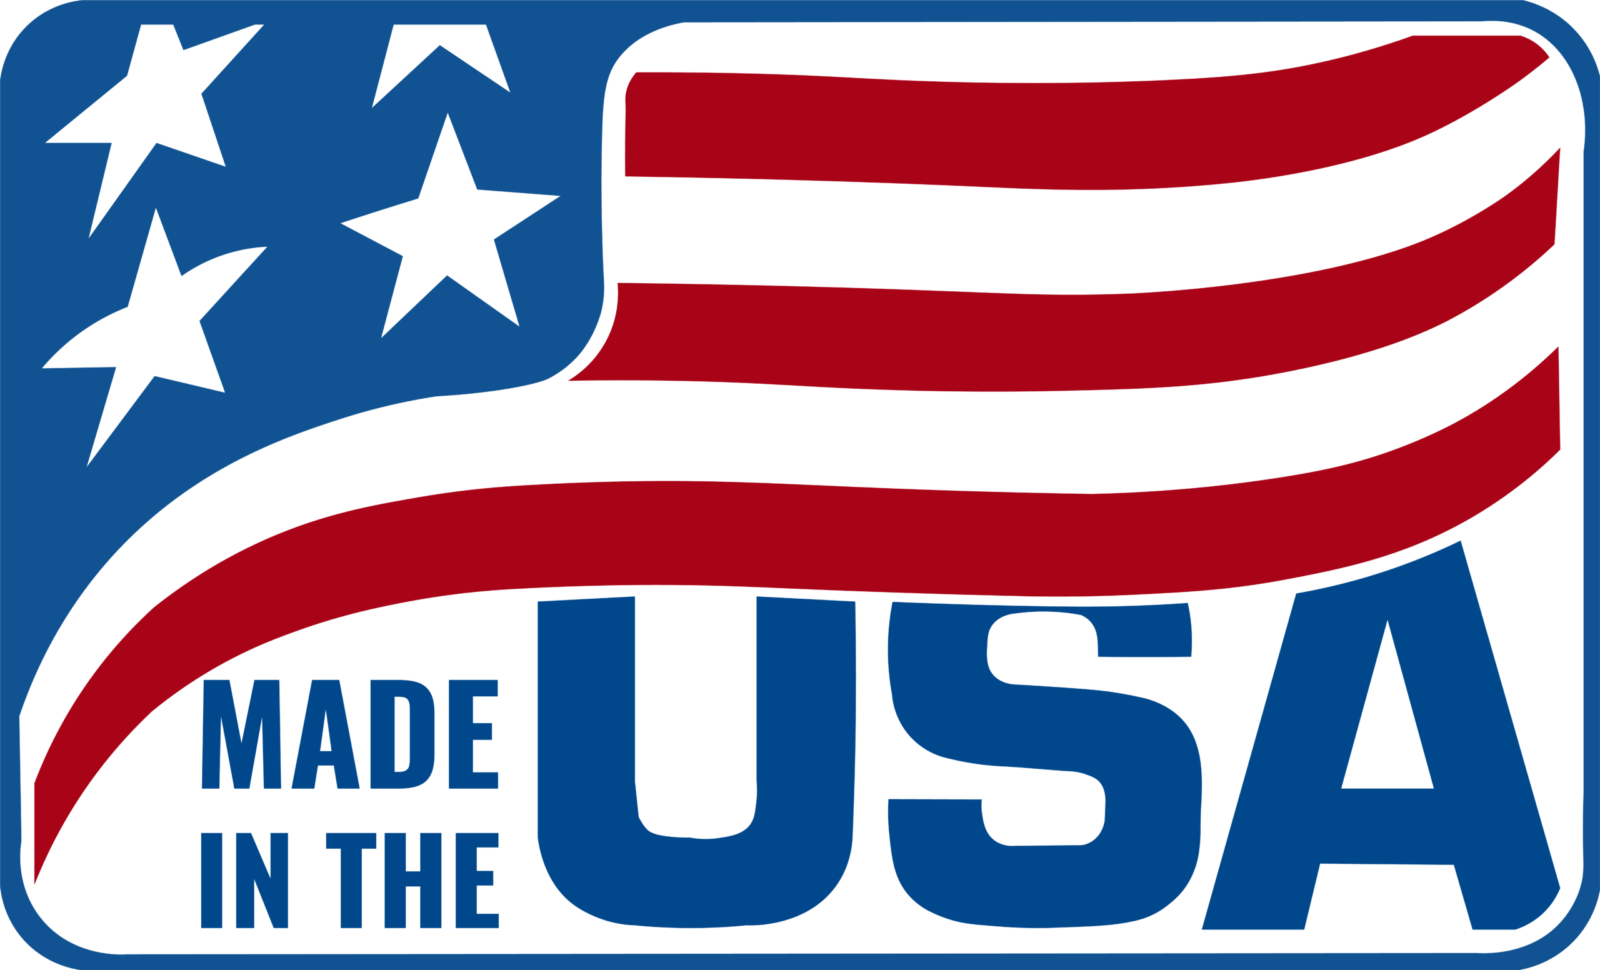 MADE IN THE USA LOGO WITH USA NATIONAL LOGO